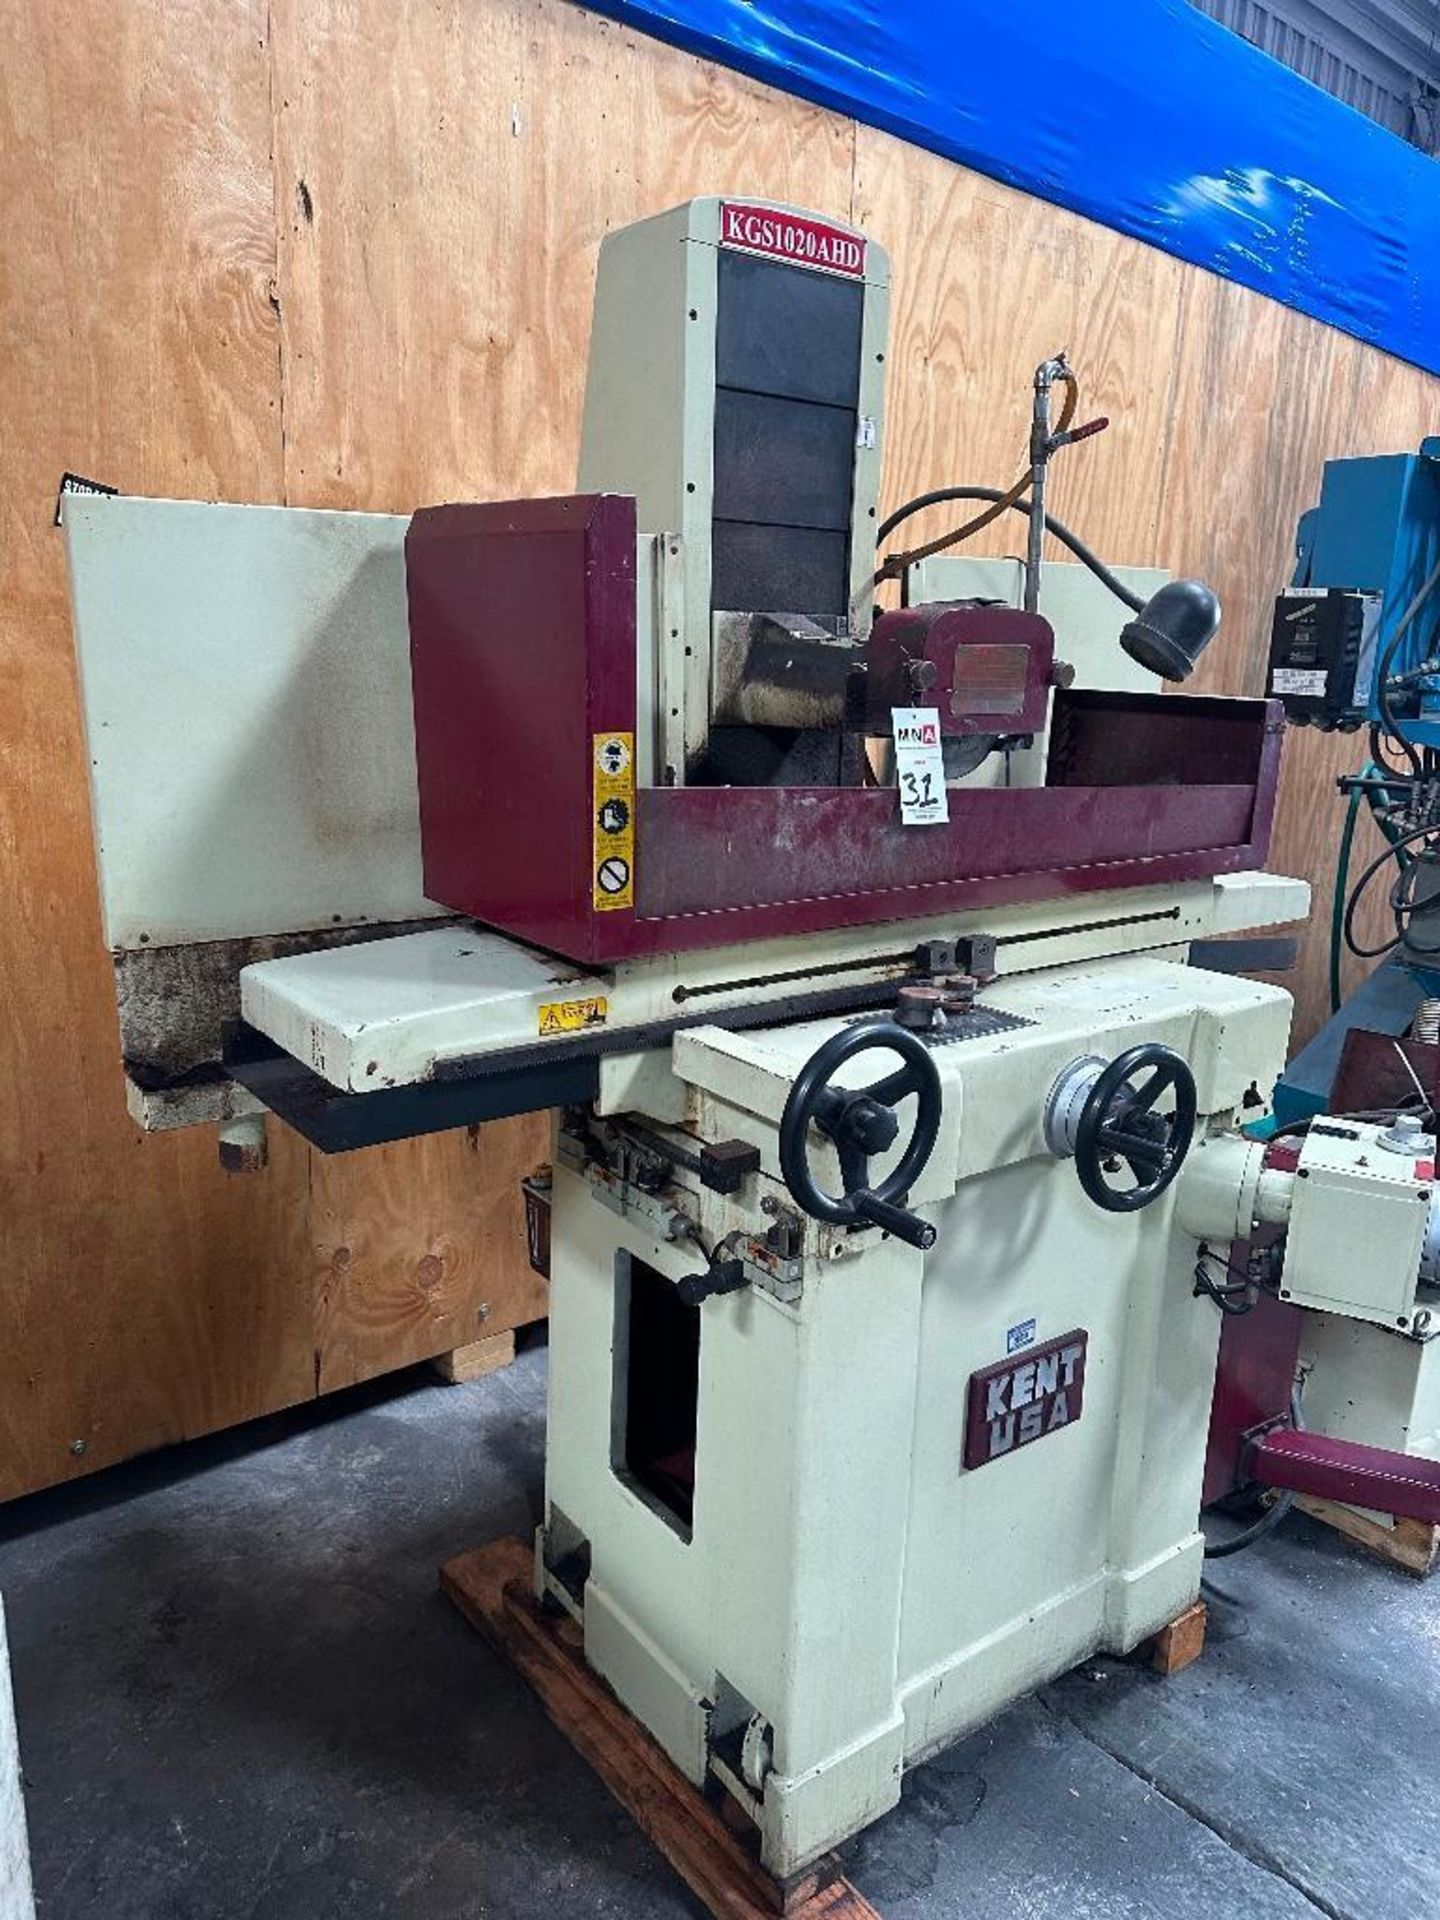 Kent USA KGS1020AHD 10"x20" Automatic Surface Grinder, s/n KT50809, 2005 - Image 2 of 5